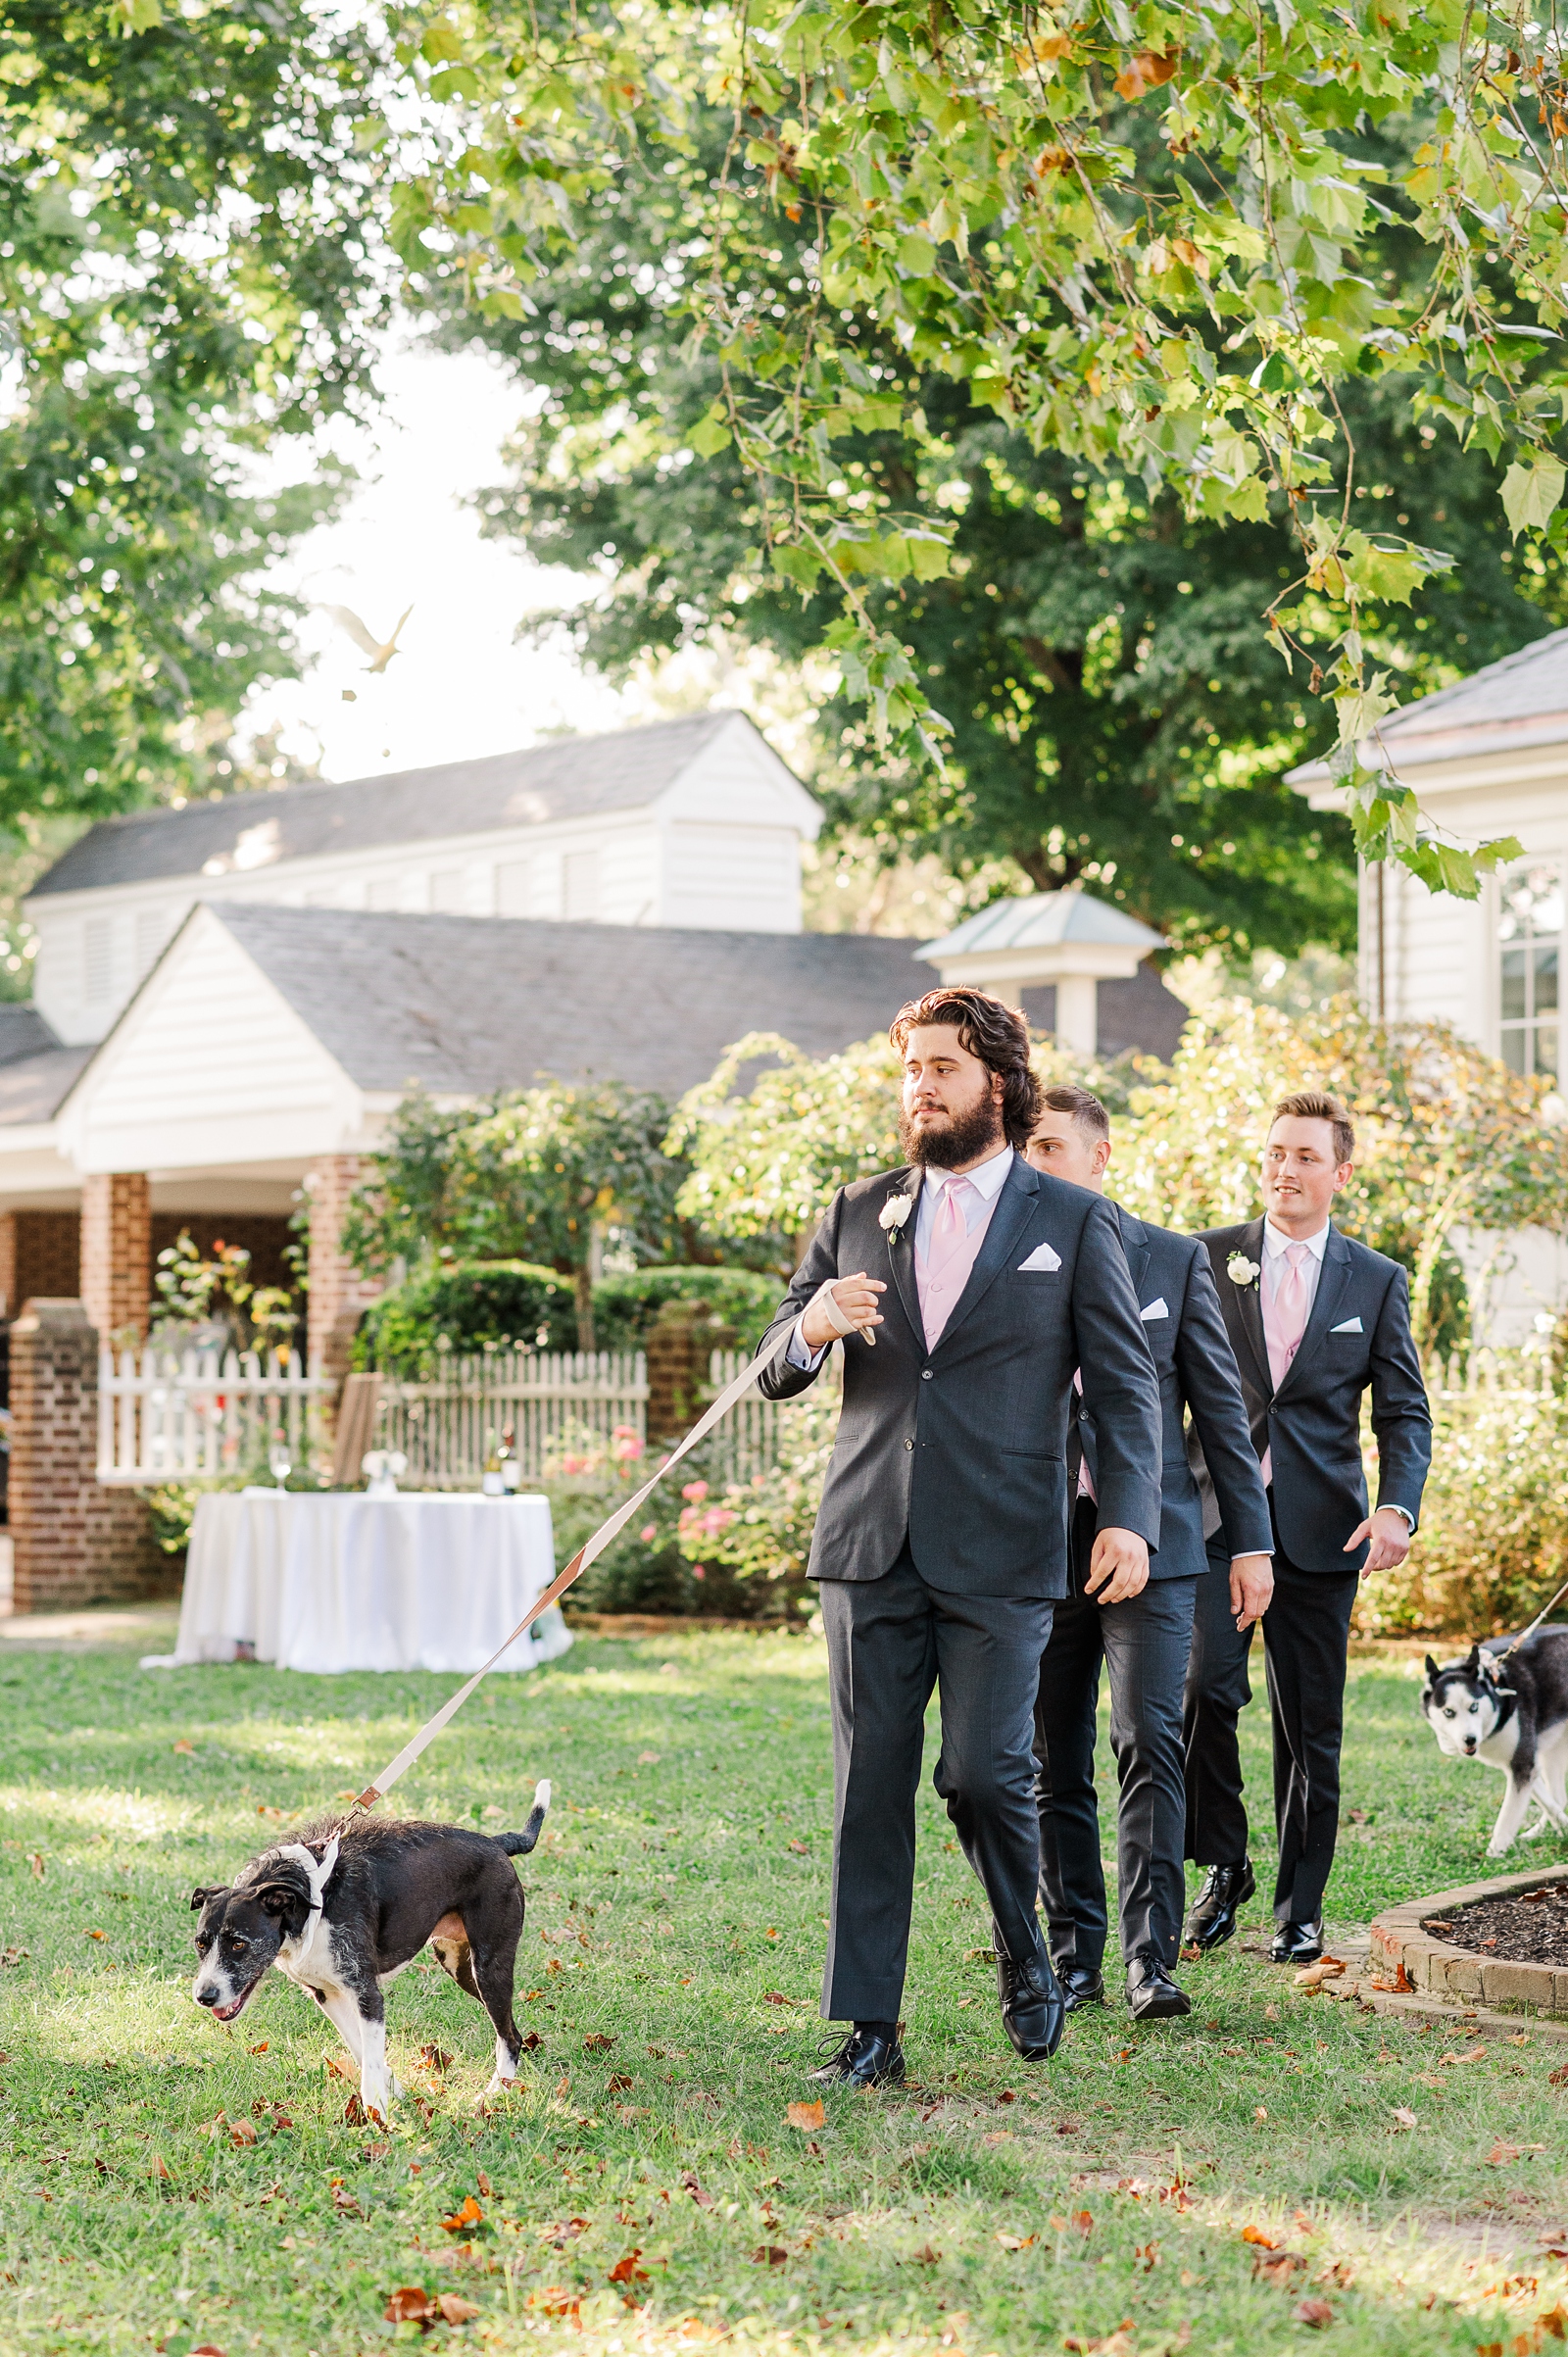 Dogs in Summer Wedding Ceremony at Cumberland Estate. 